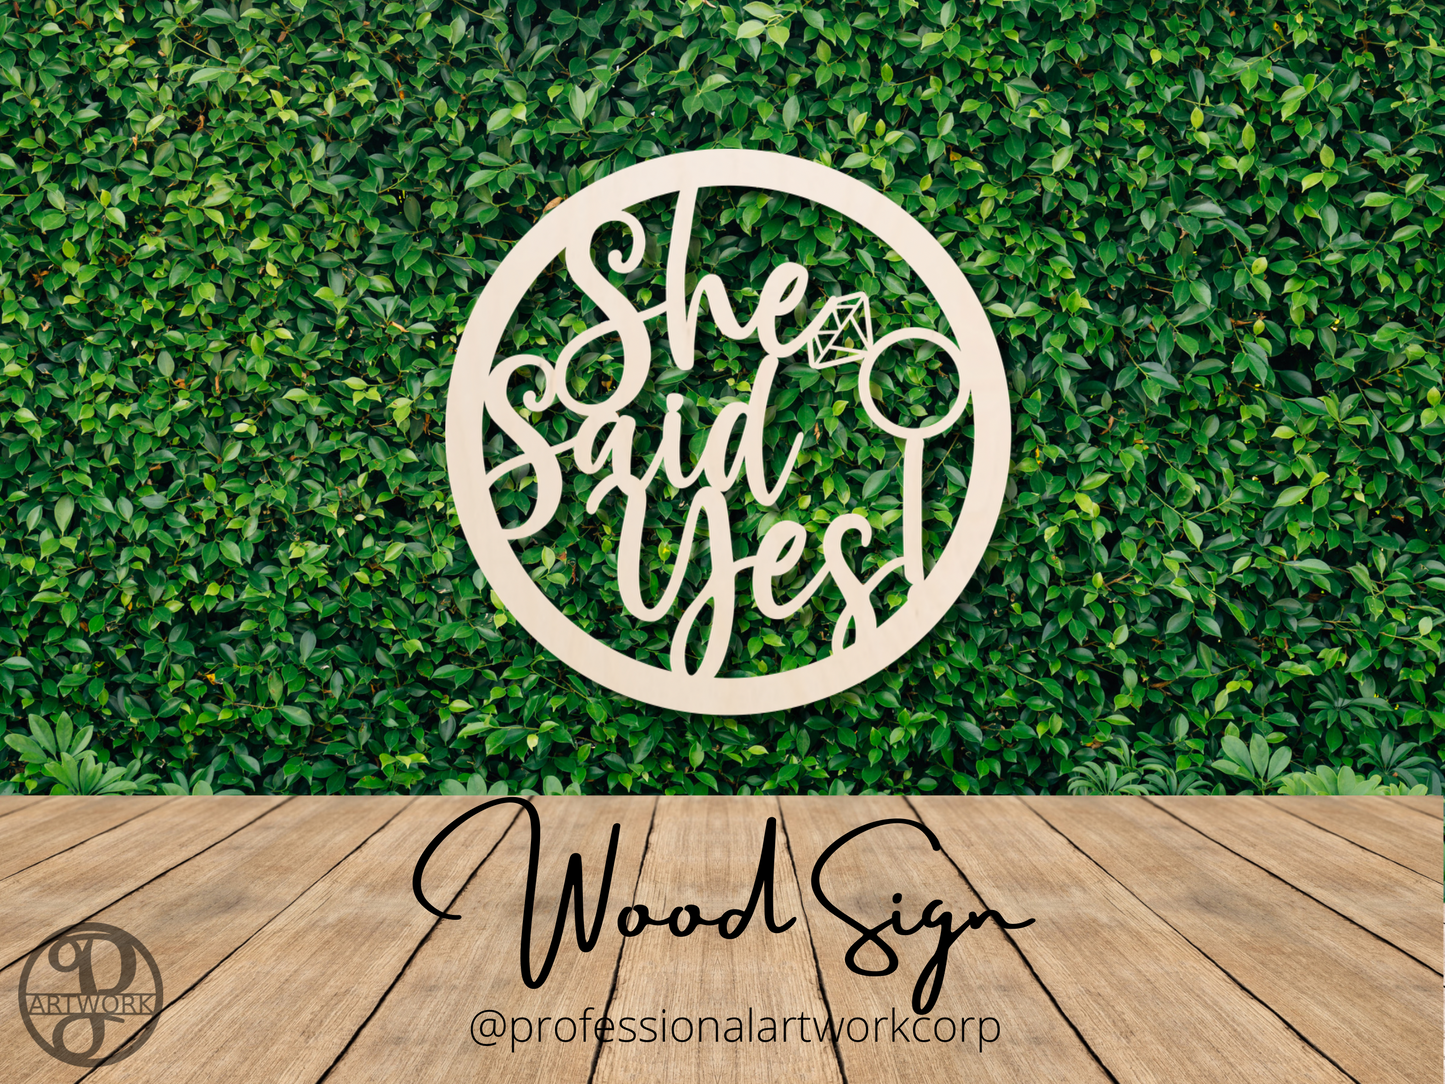 She Said Yes Round Wood Sign - Professional Artwork